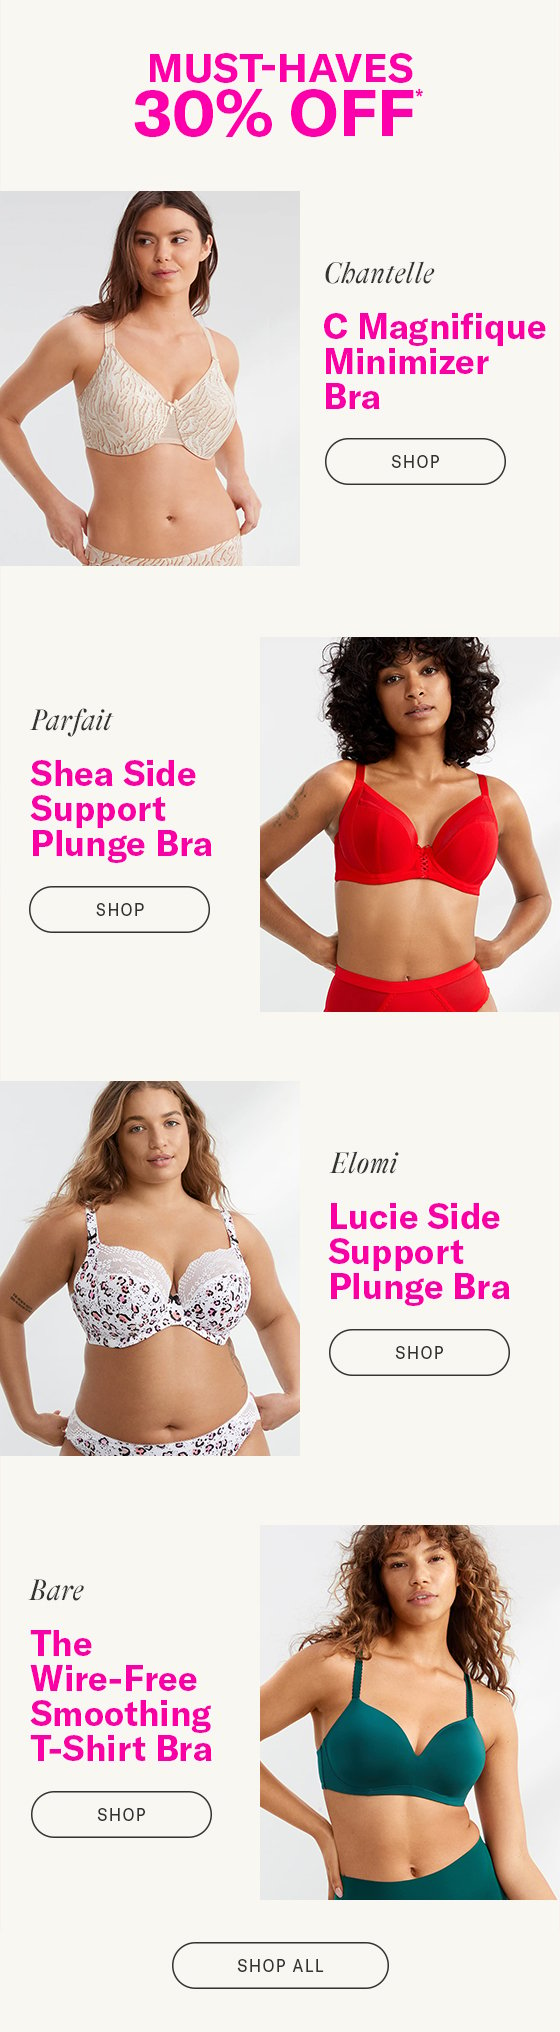 Exclusive VIP Offer: 30% Off Must-Have Bras Inside! - Bare Necessities